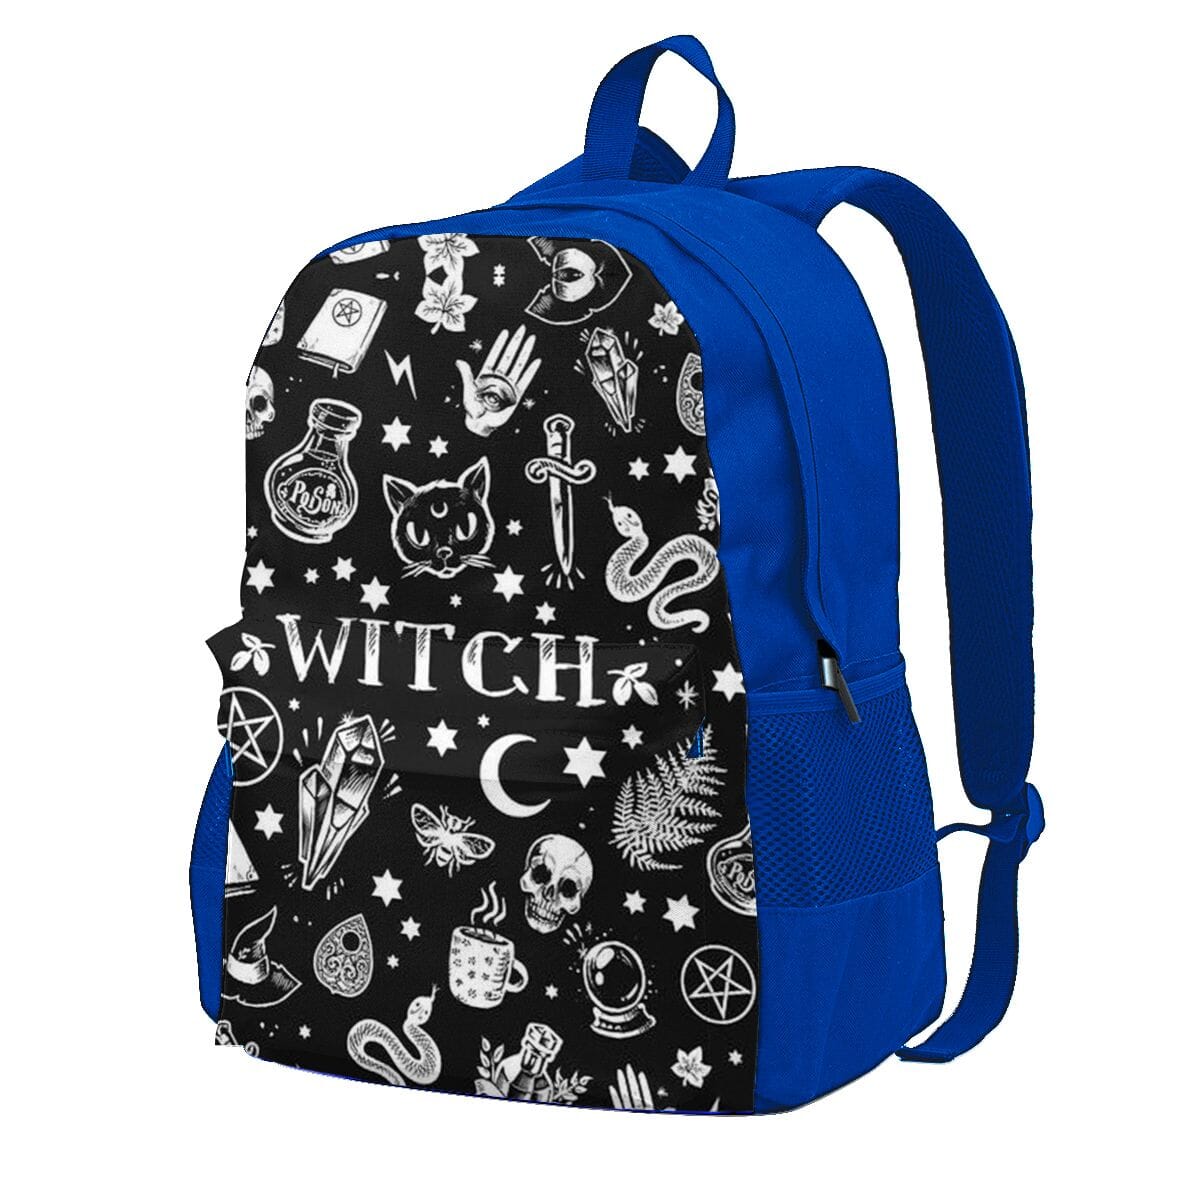 Witchy Backpack Purse The Store Bags Blue 